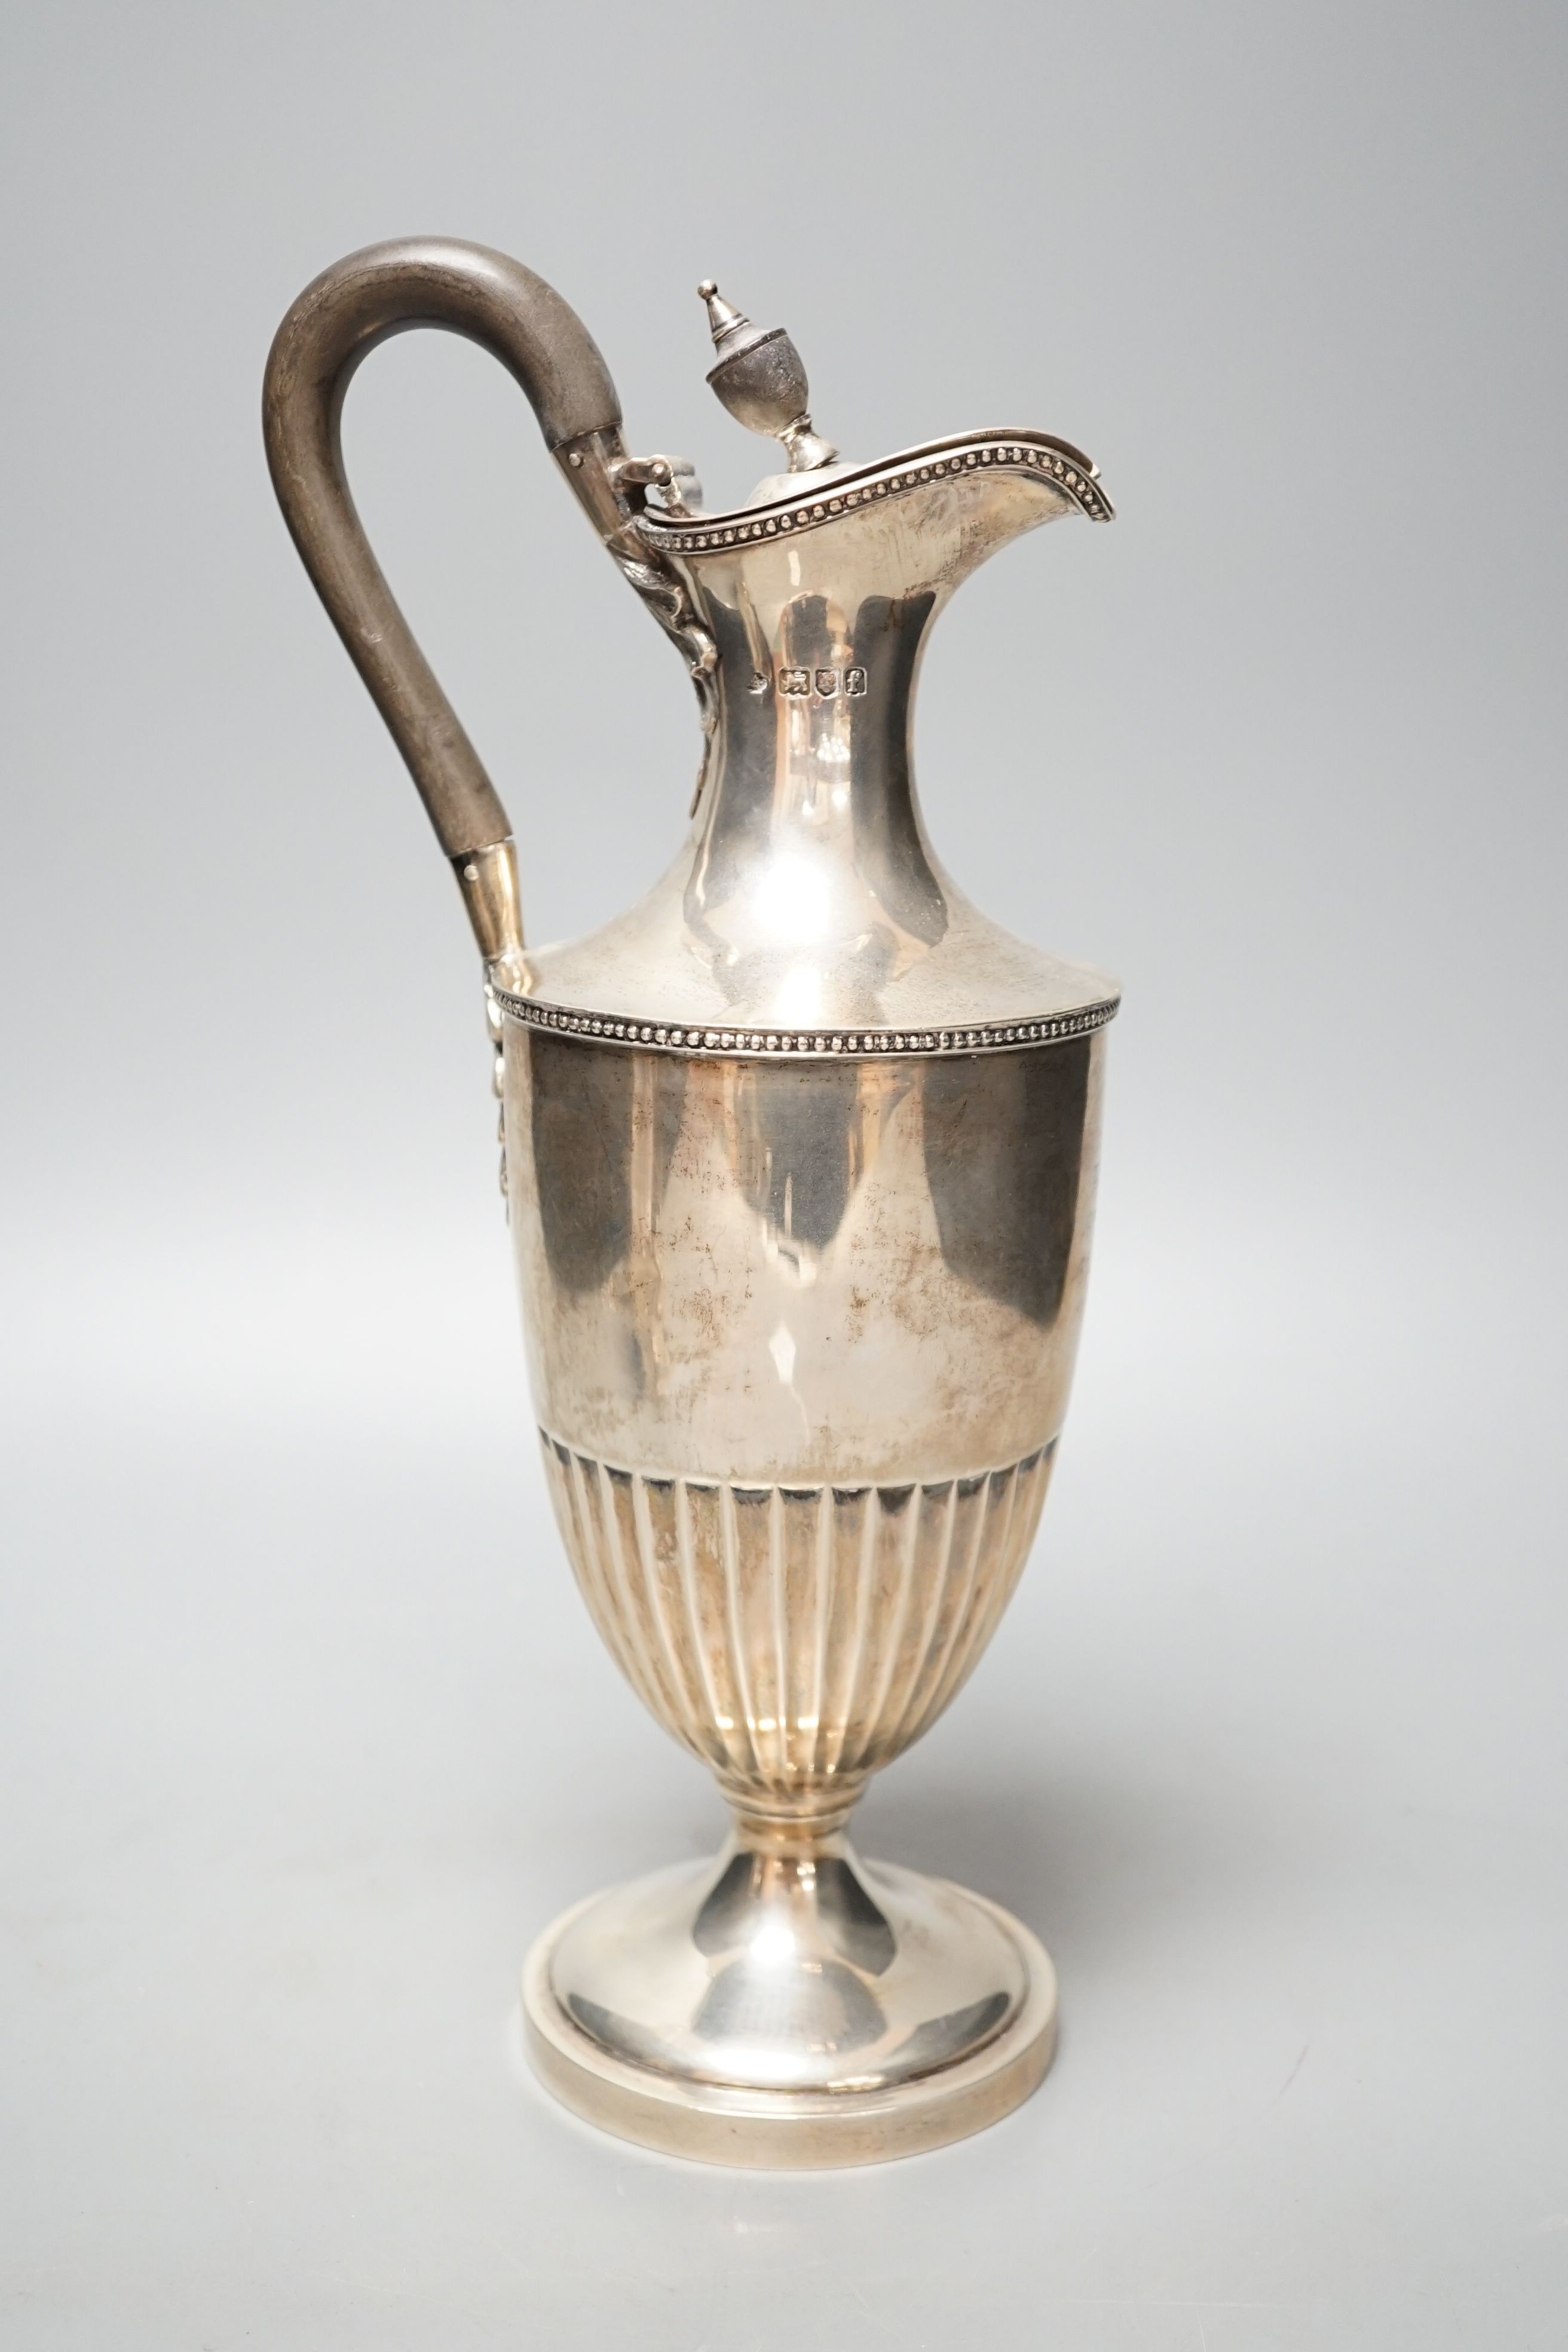 An Edwardian silver hot water jug, by William Hutton & Sons, London, 1901, height 30.7cm, gross weight 18.5oz.